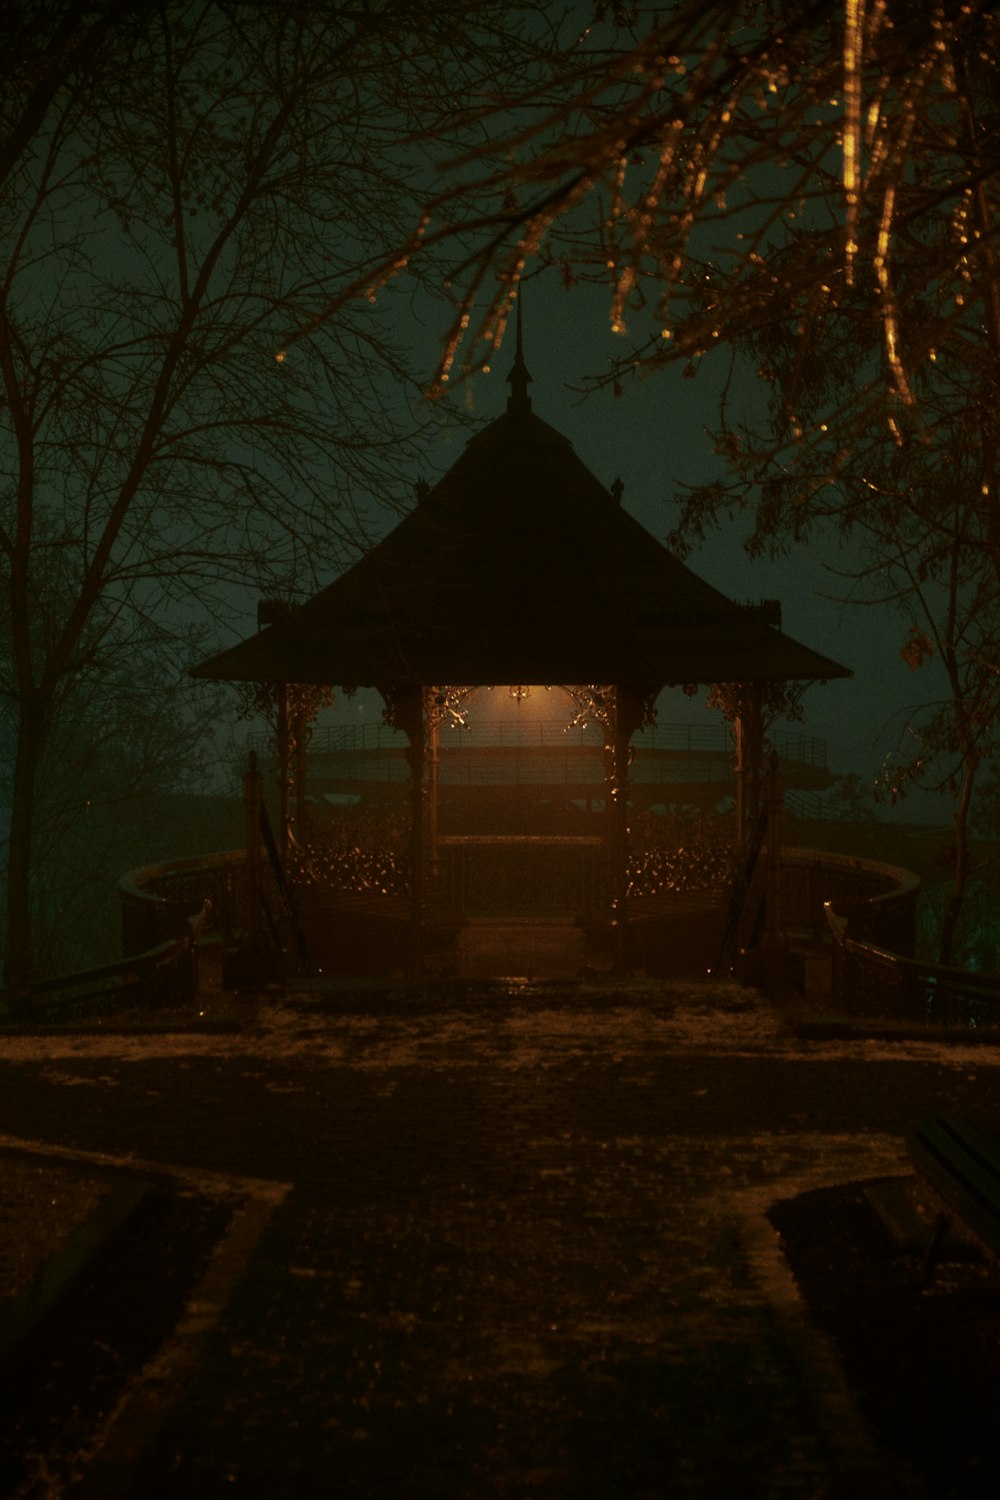 a gazebo in the middle of a park at night